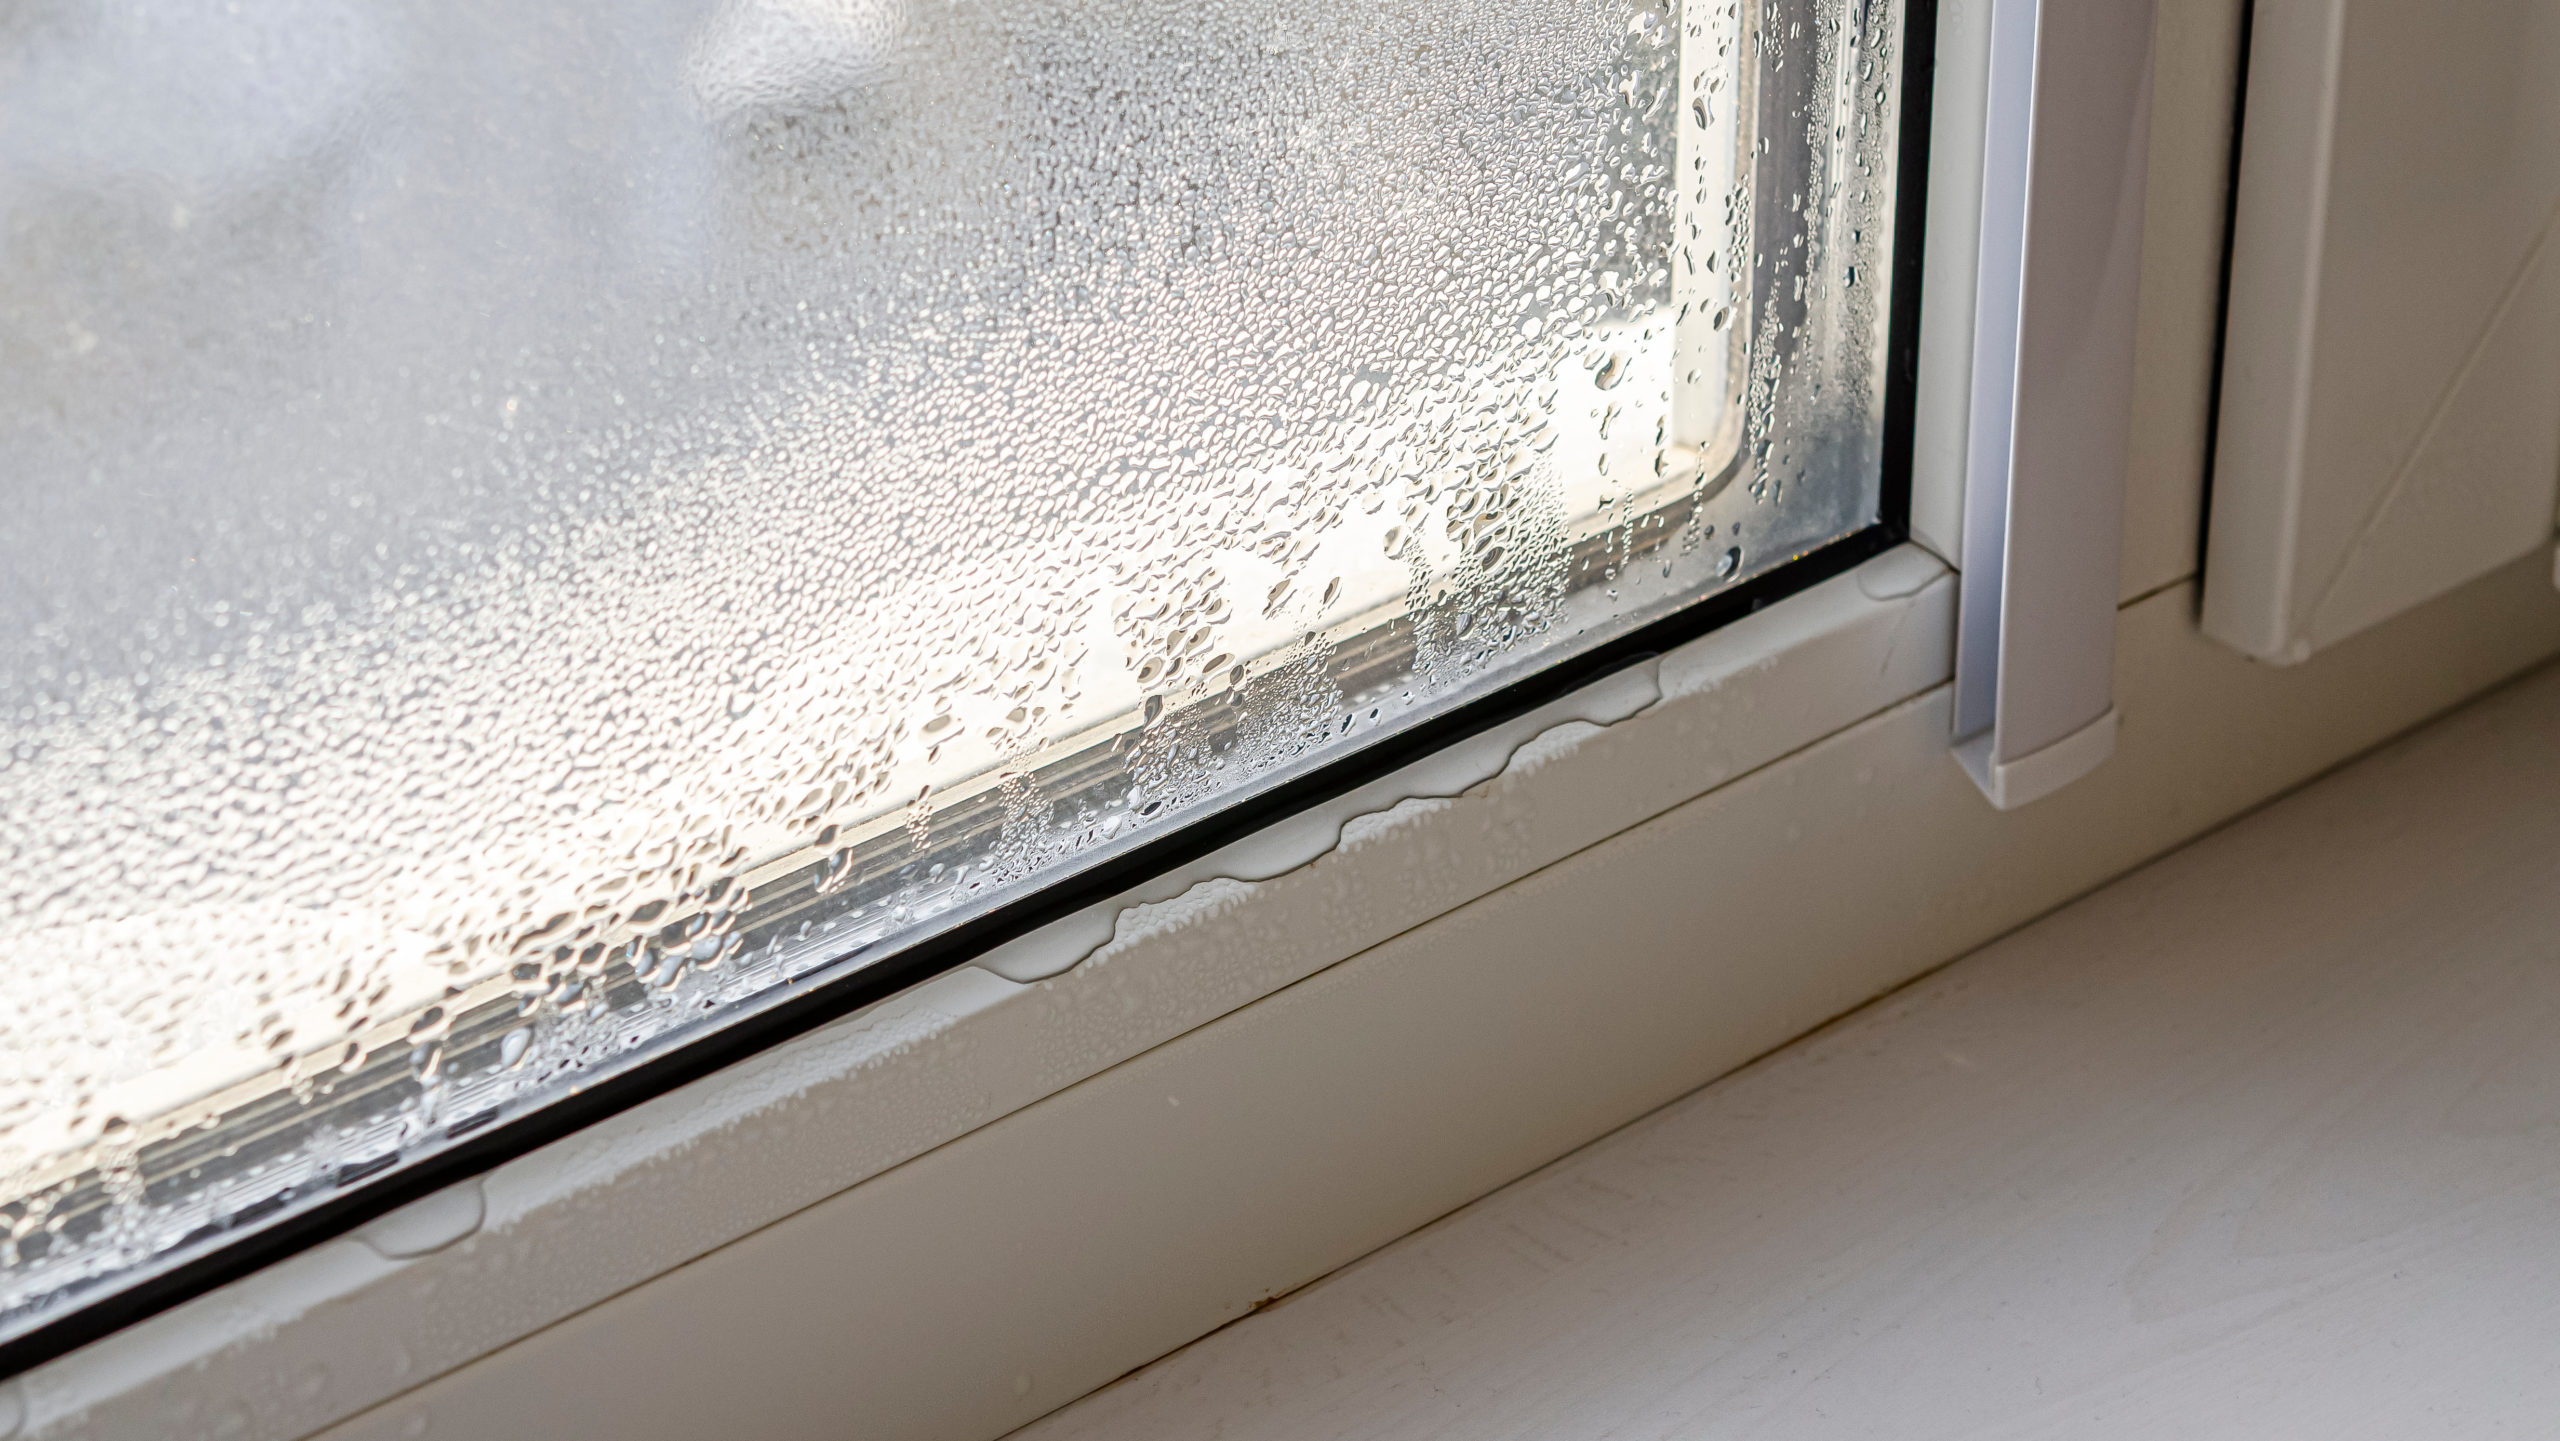 a double-glazed window with condensation forming all over it, which is causing a leak onto a white kitchen surface